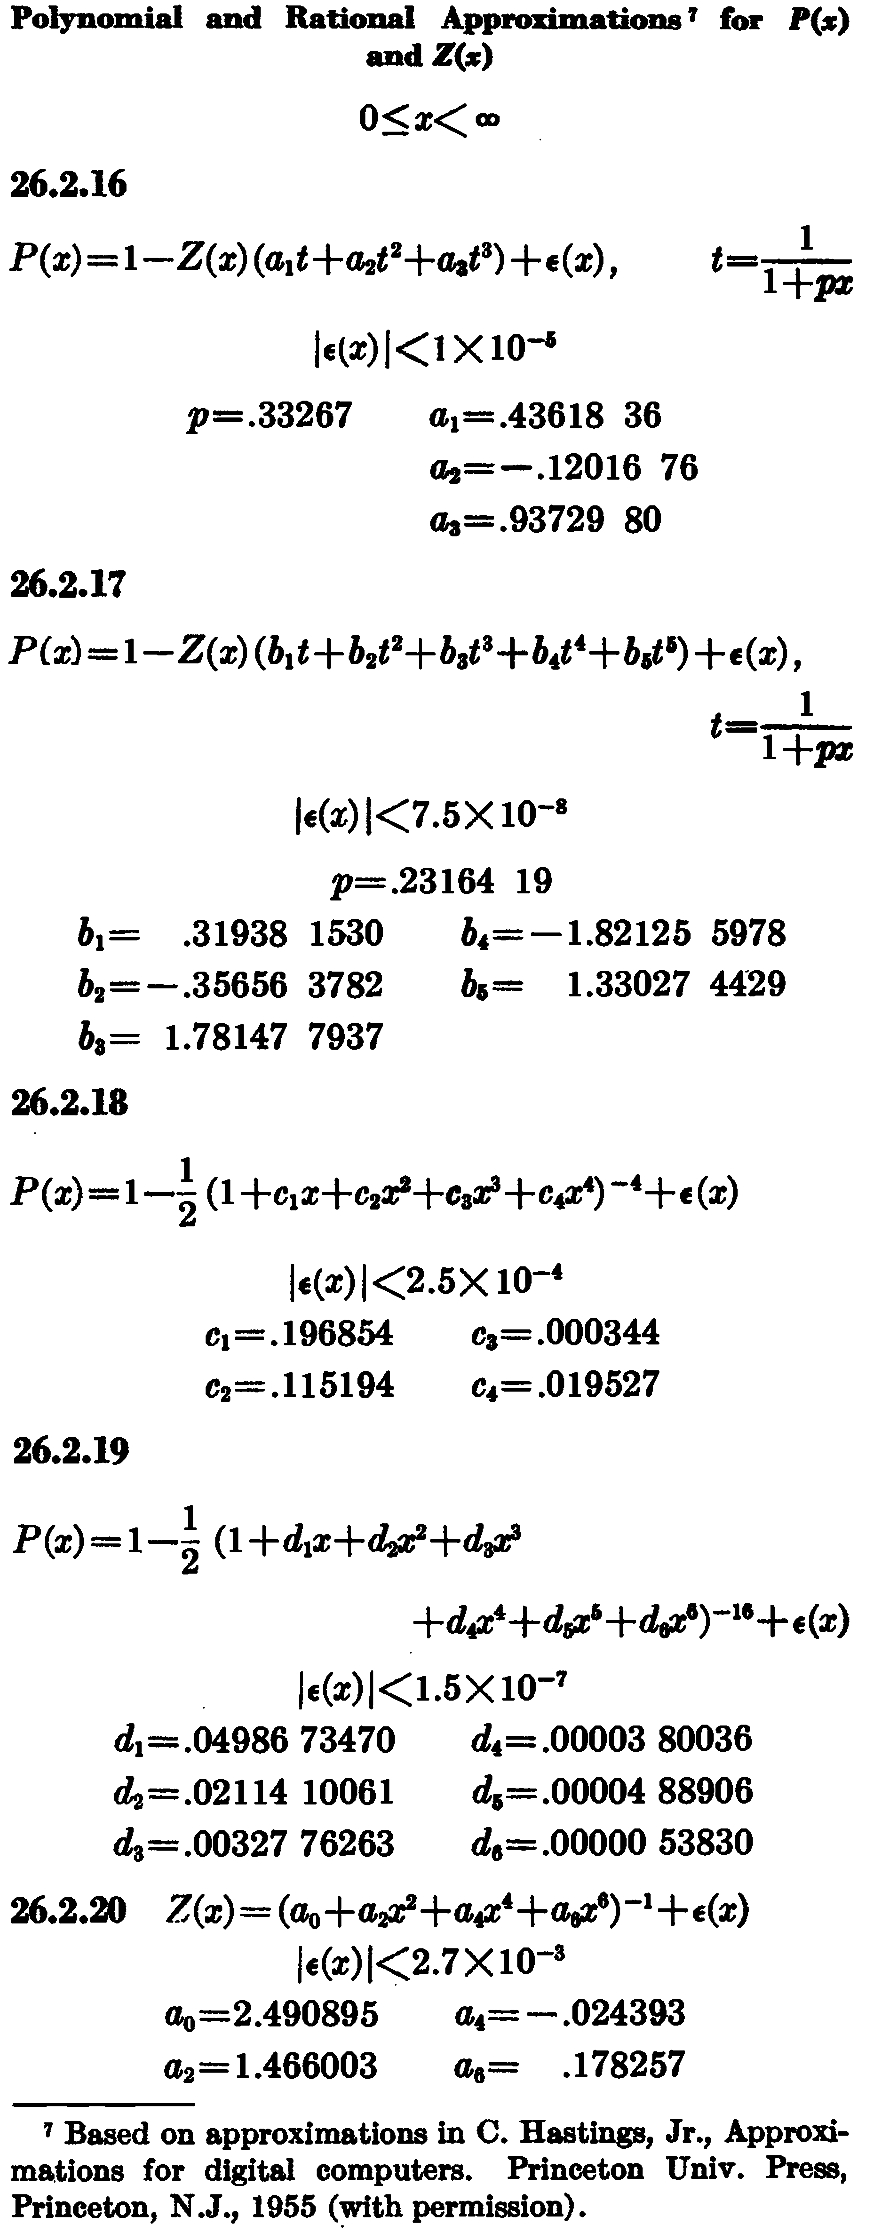 Handbook_of_Mathematical_Functions_with_FGMT page 932 _.jpg